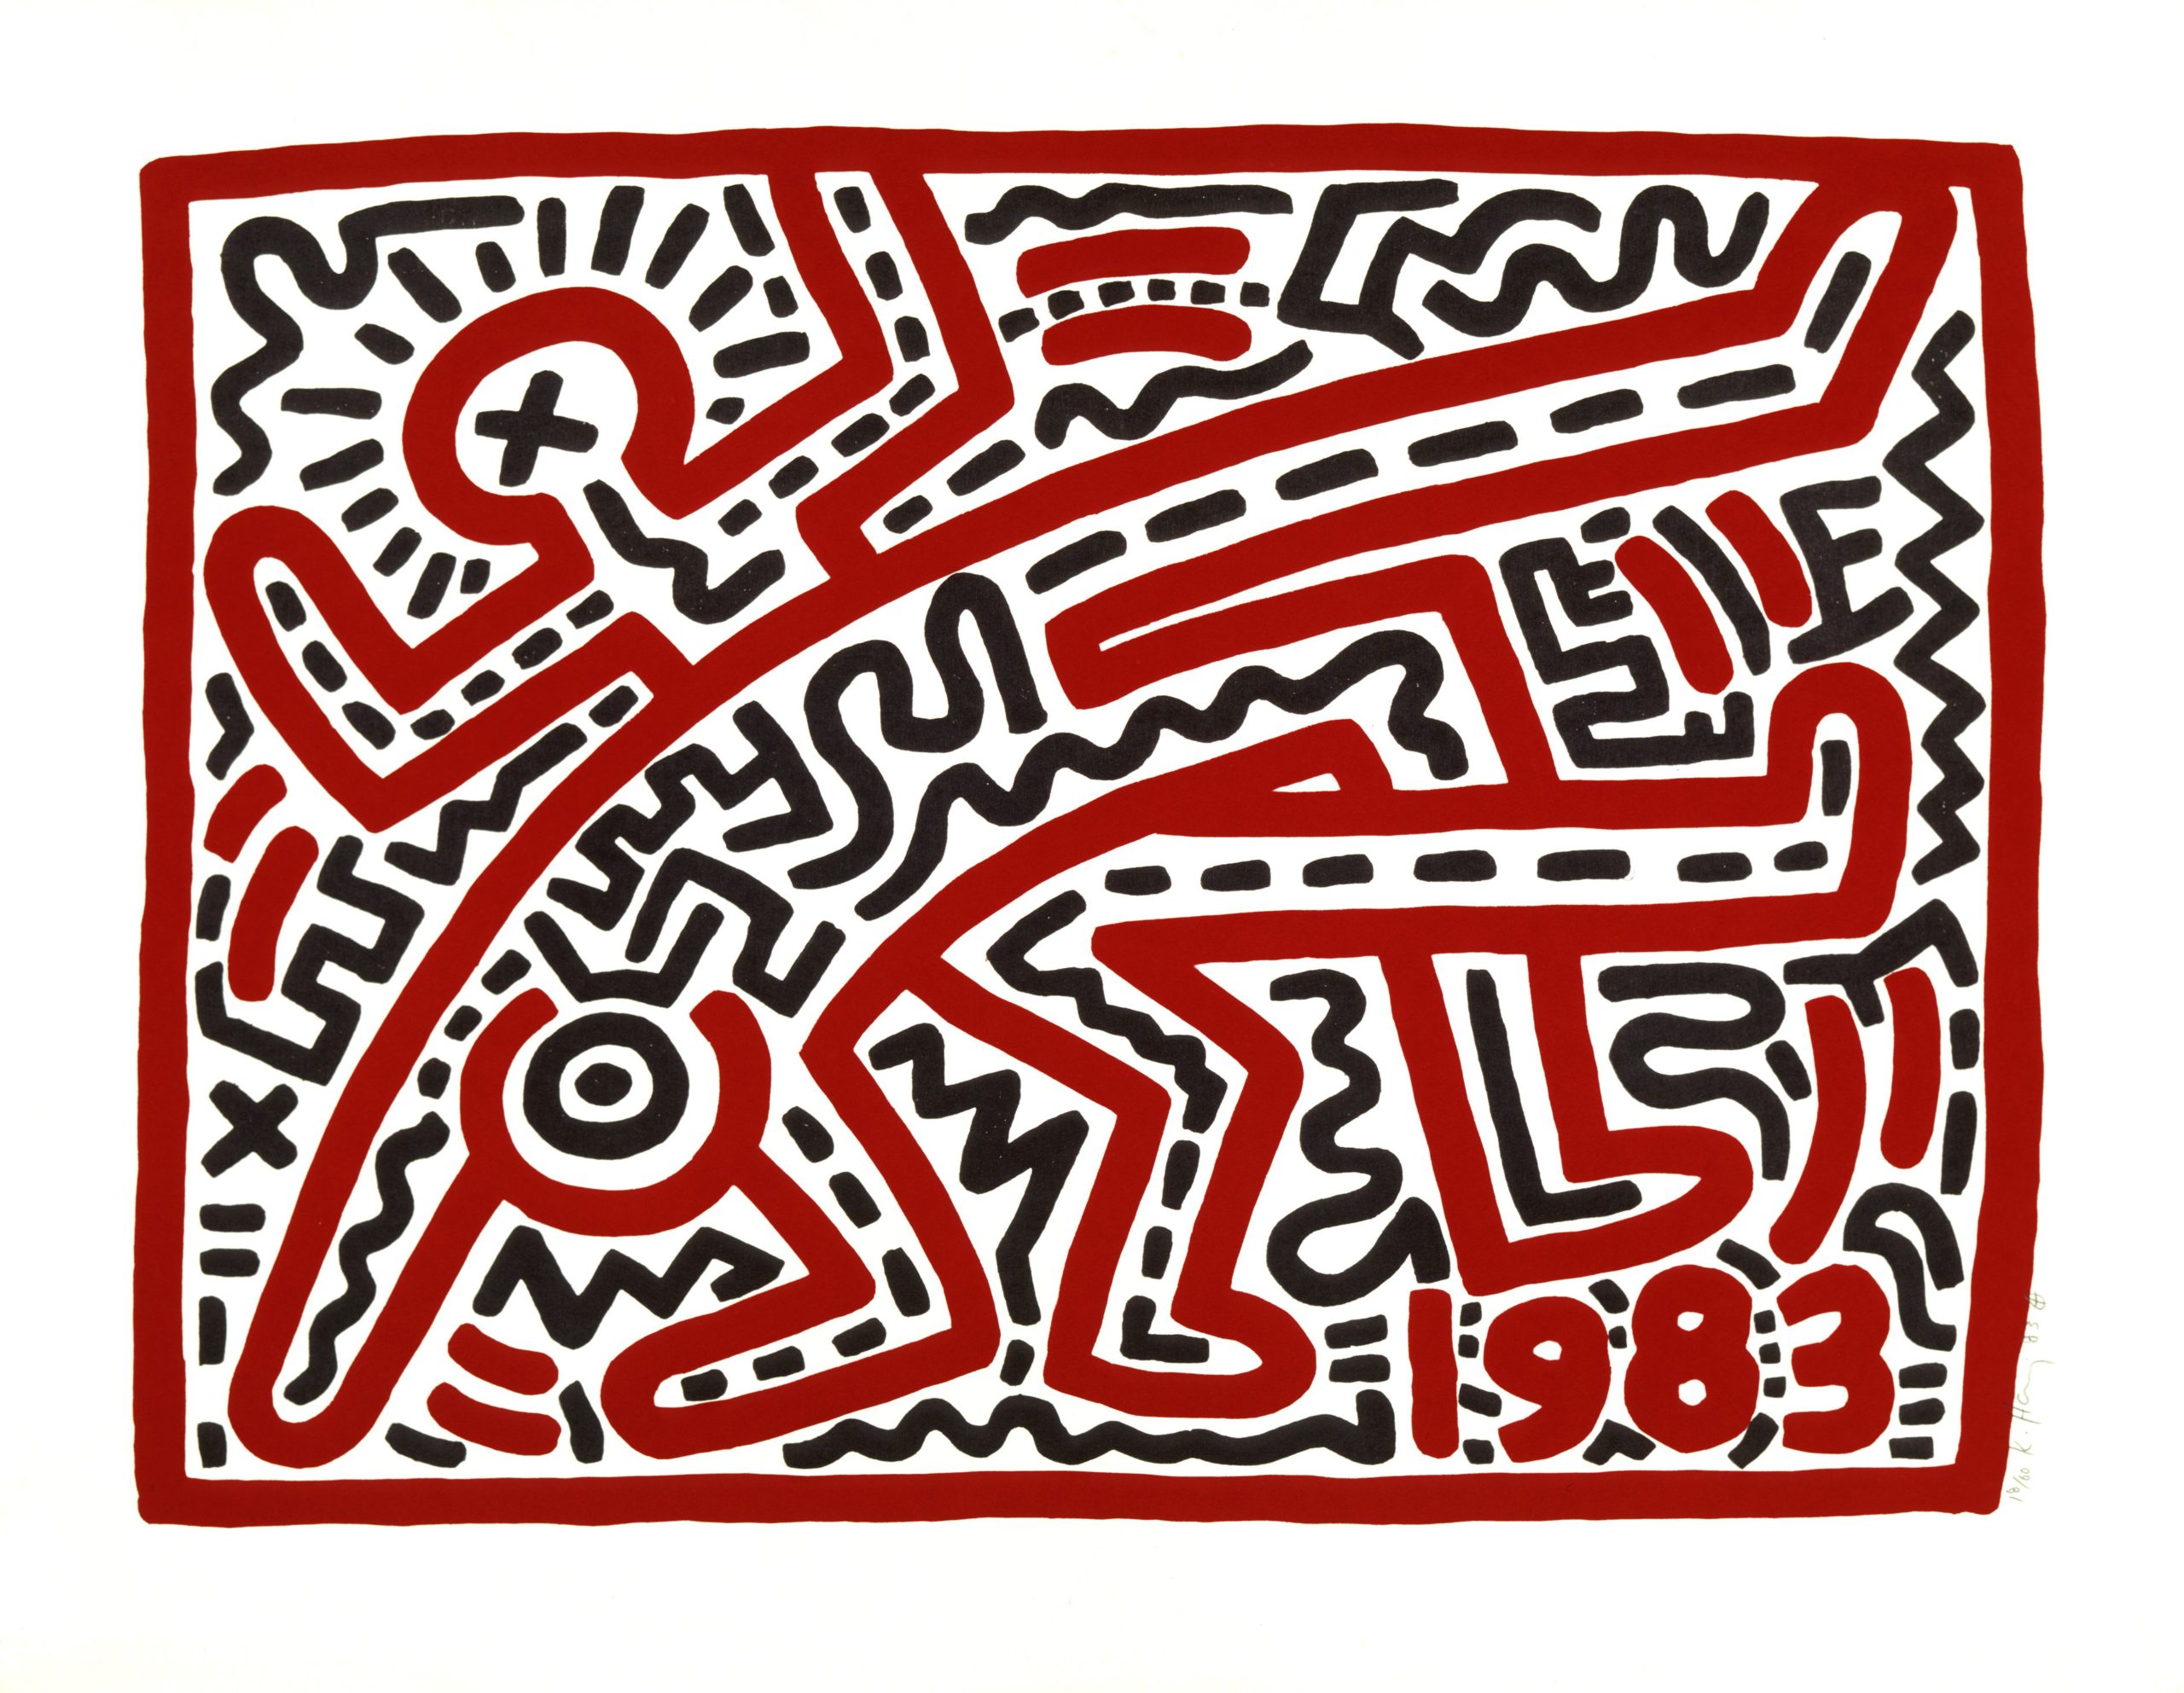 KEITH HARING – A SPECIAL TREAT FOR YOUR EVENT AND YOUR GUESTS ...